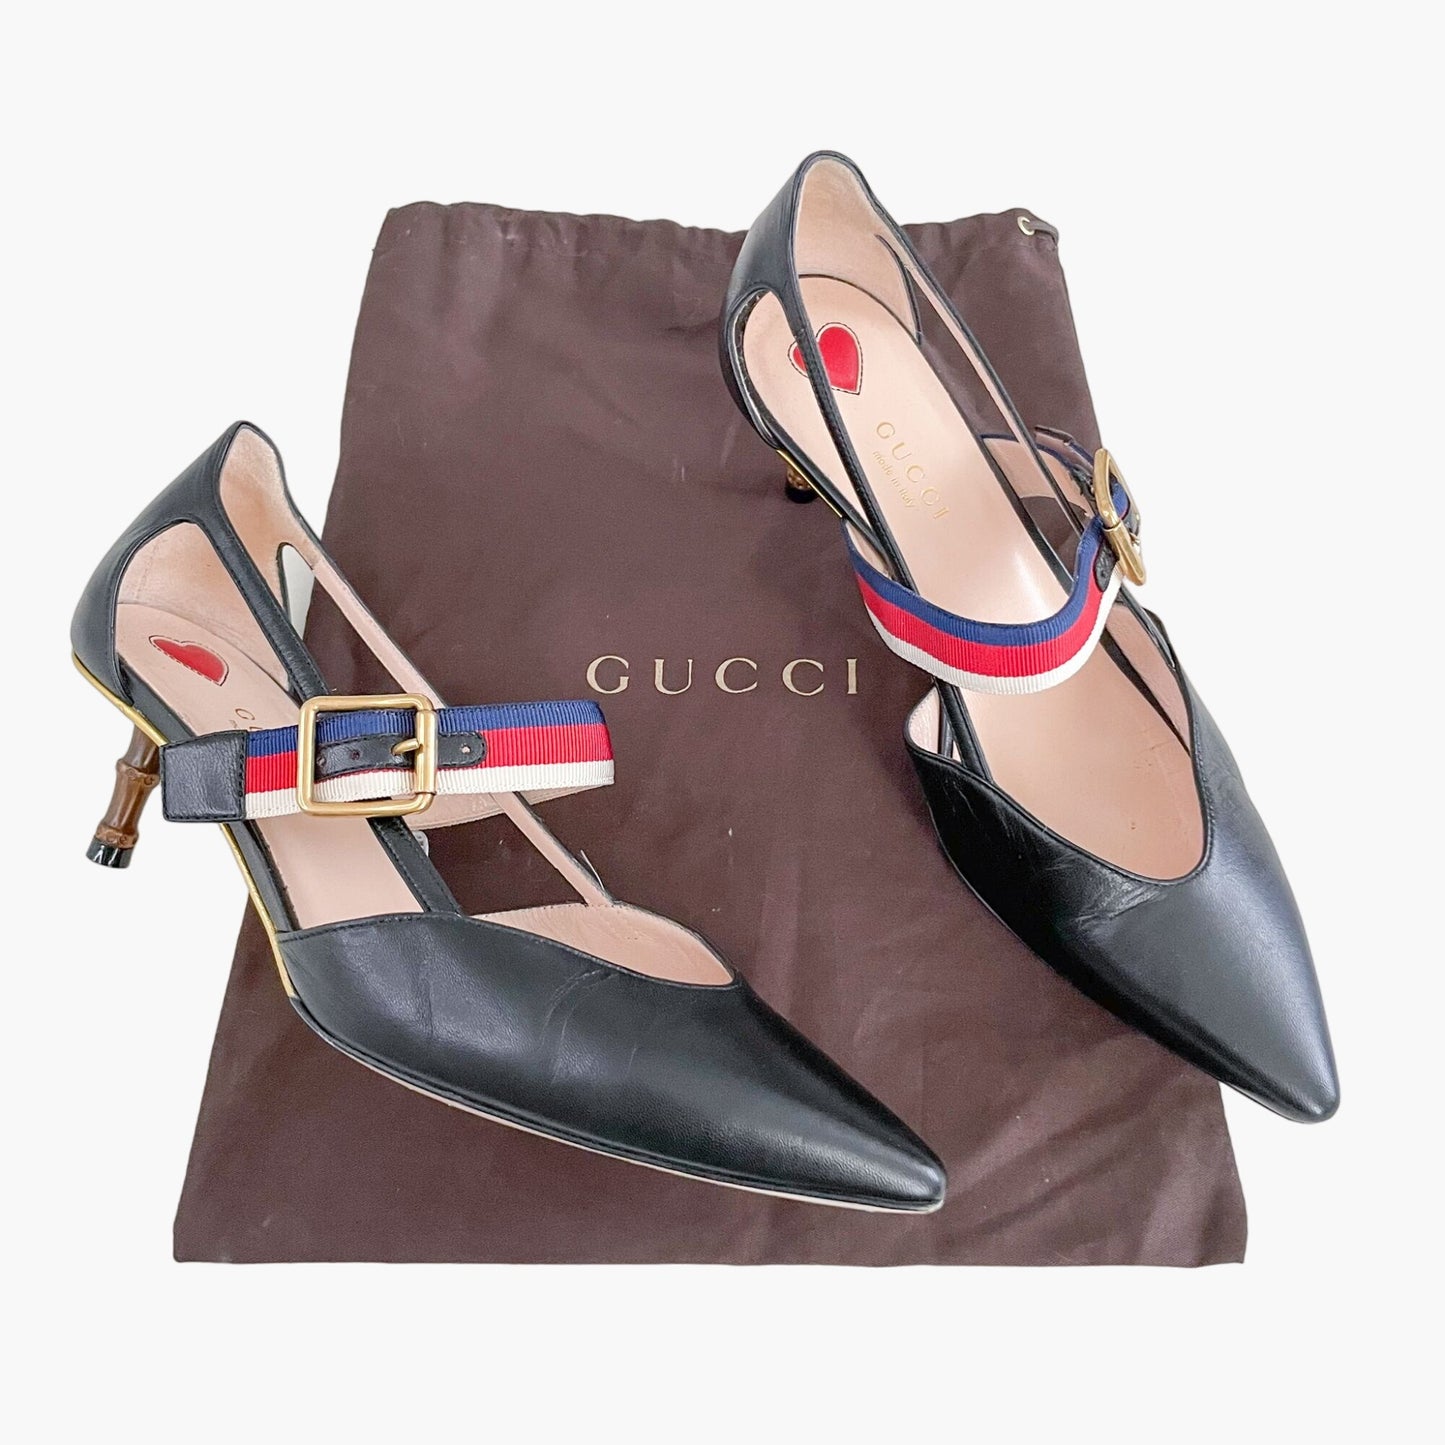 Gucci Sylvie Web Strap Bamboo Heel Unia Pumps in Black Leather Size 36.5